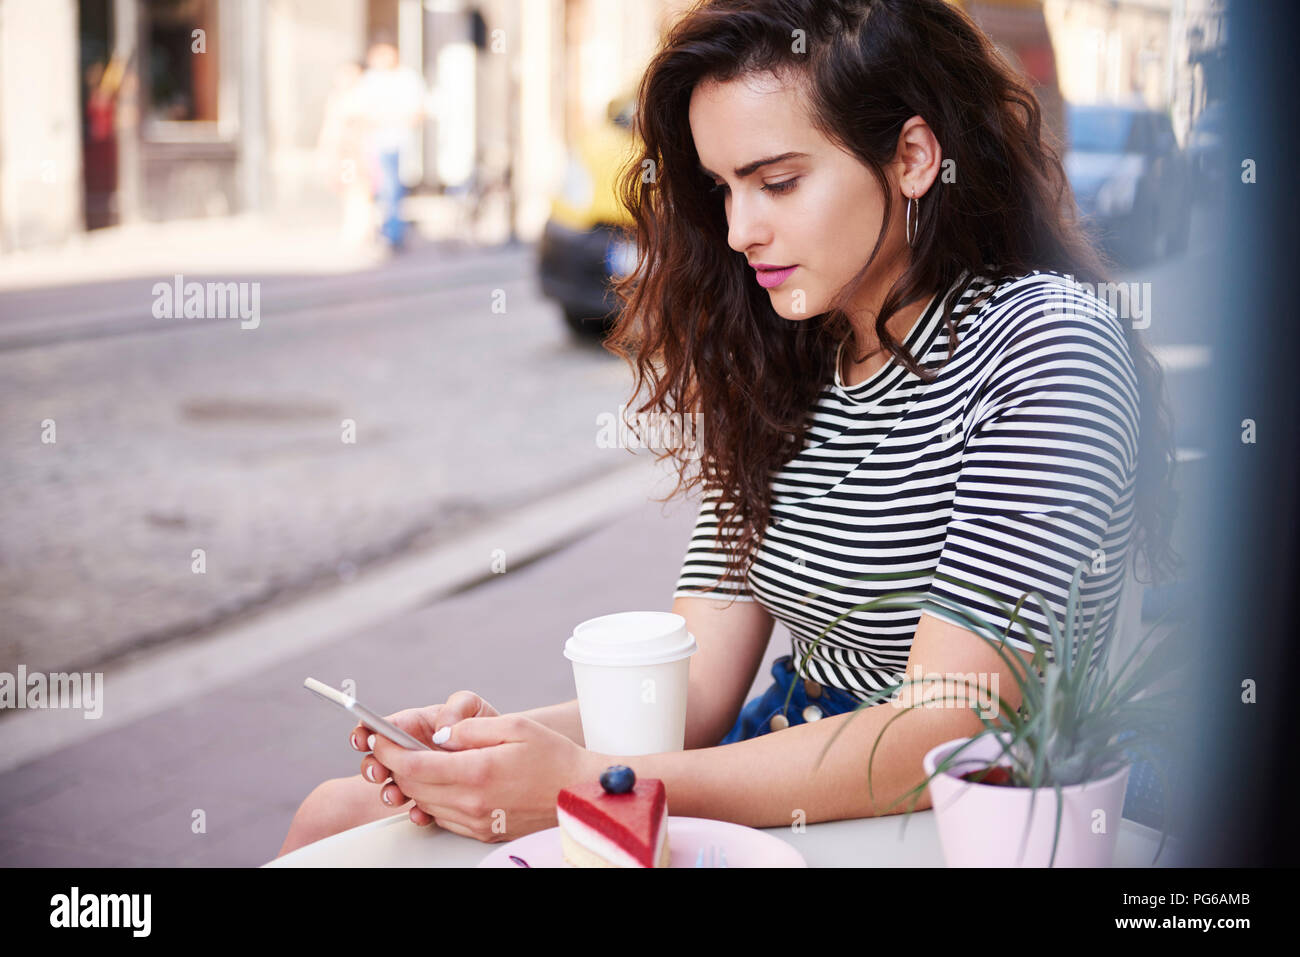 Young woman using cell phone at outdoor cafe dans la ville Banque D'Images